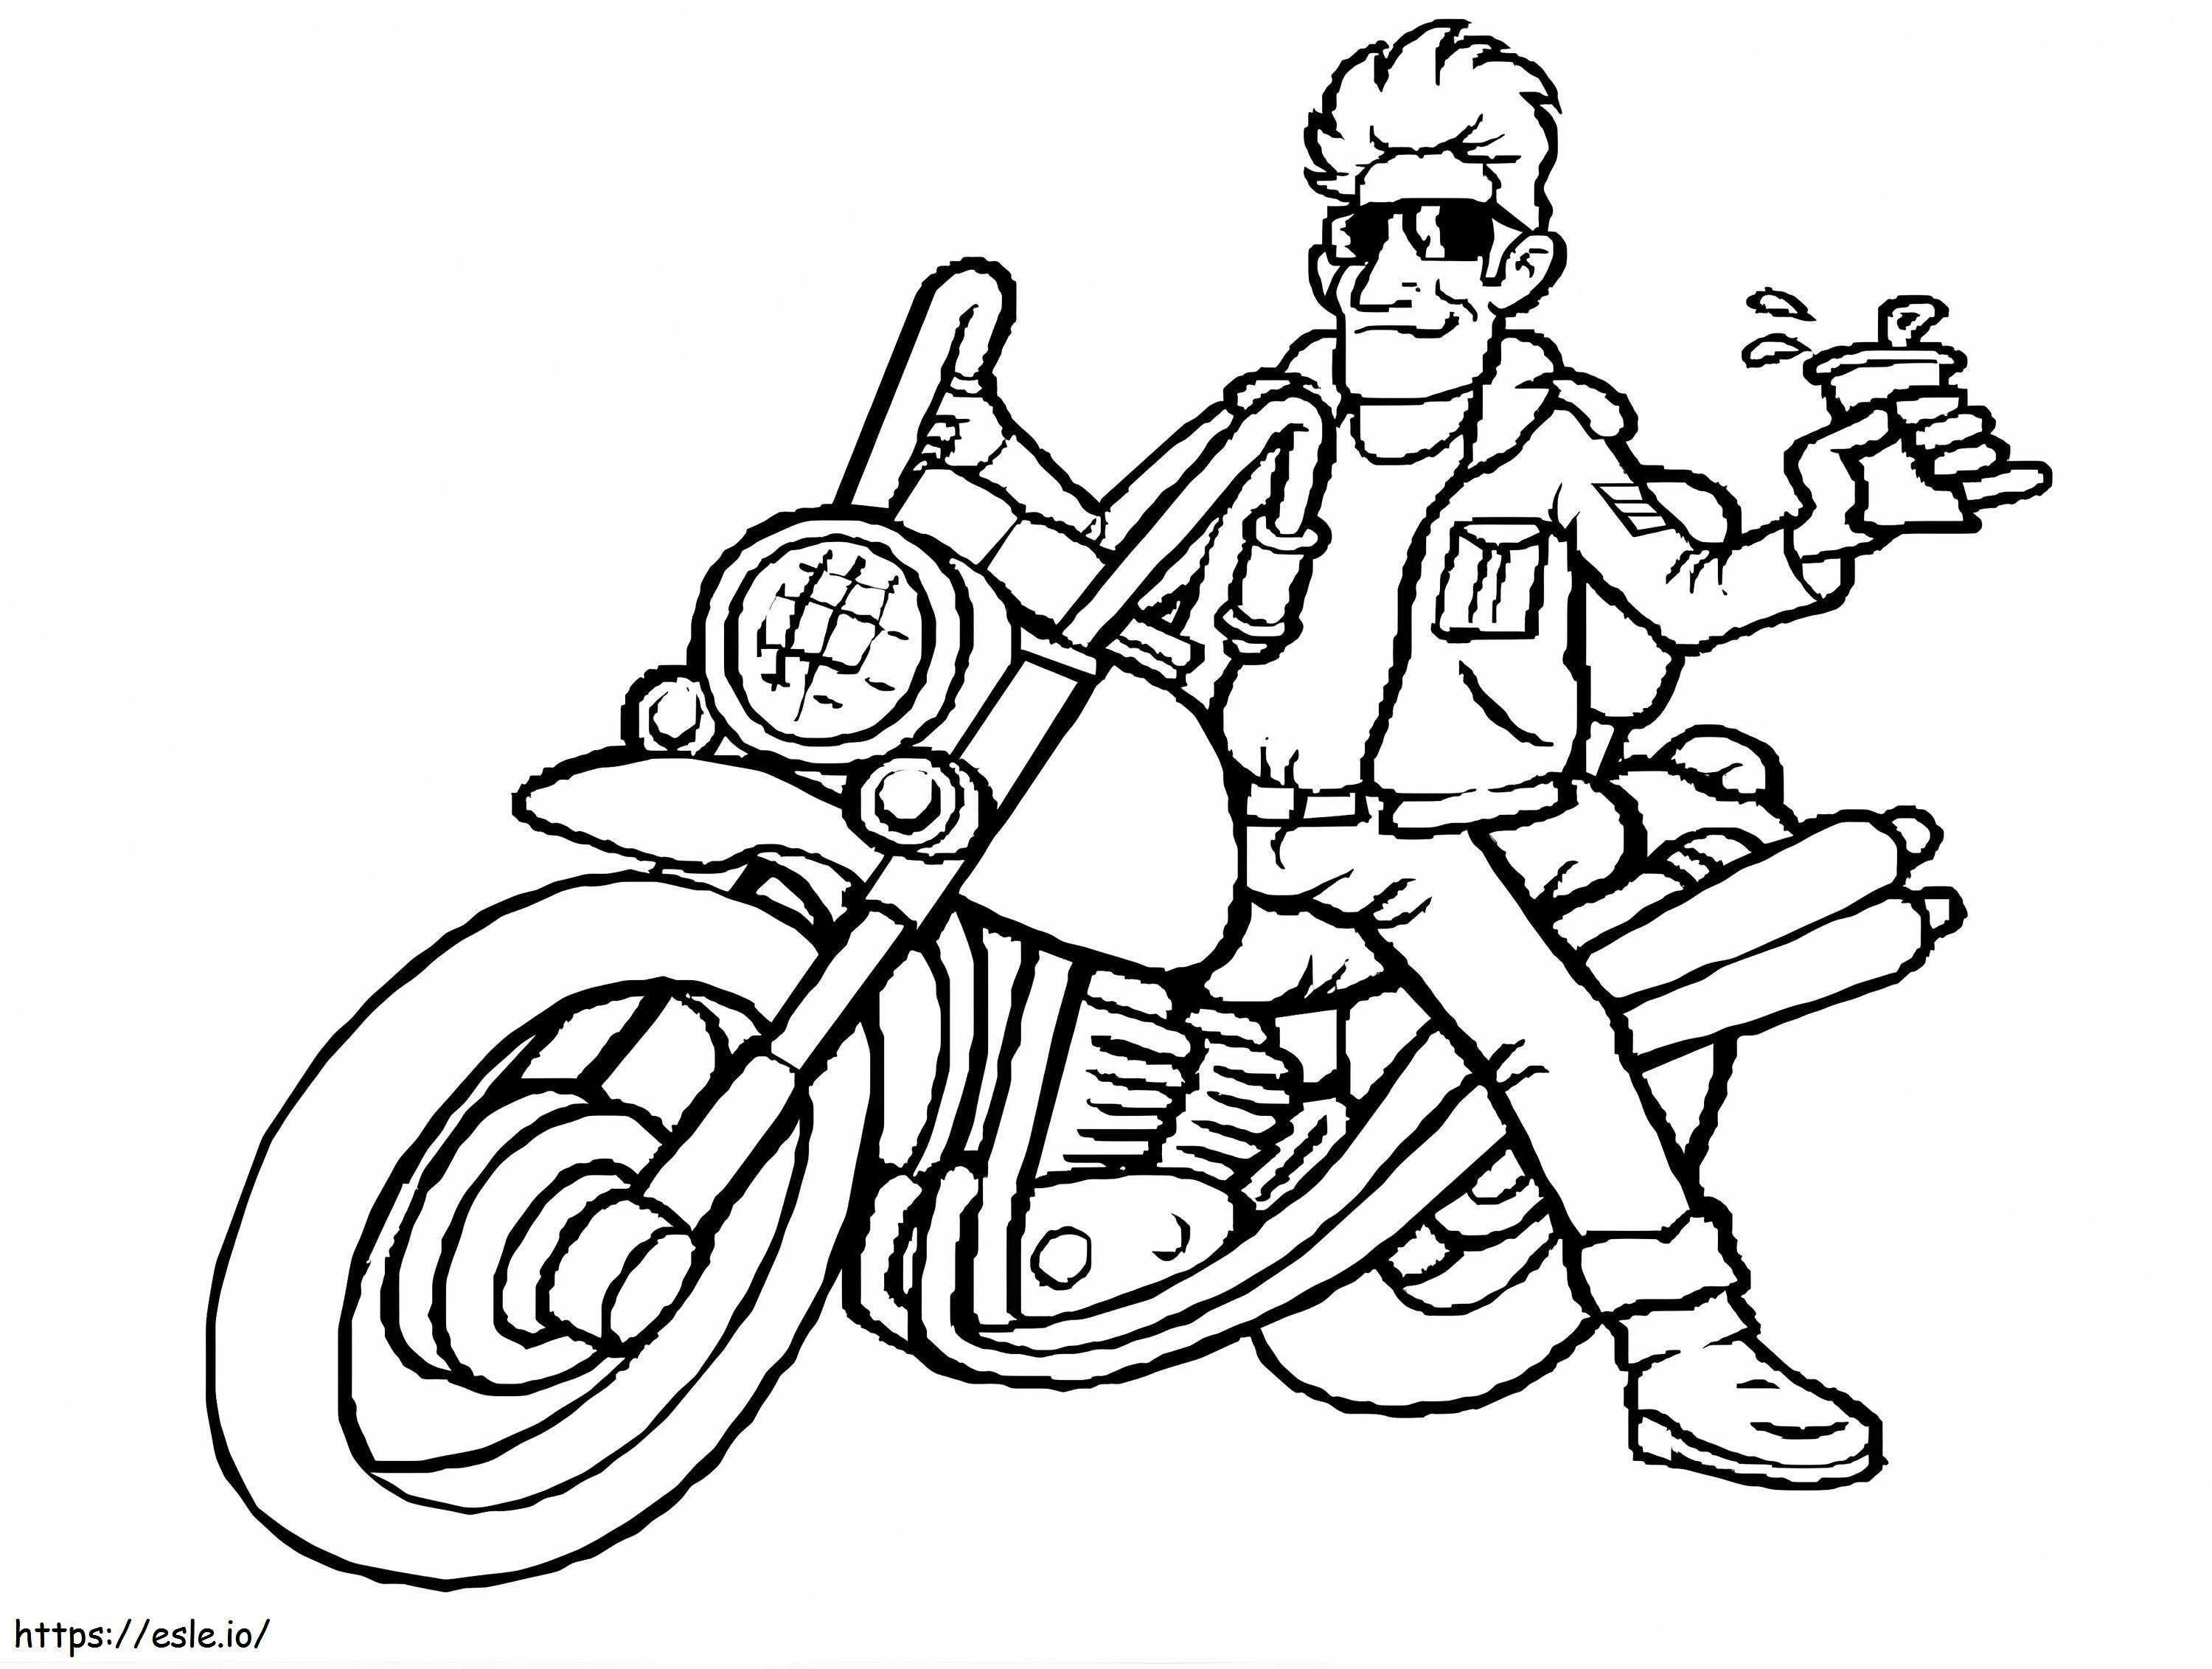 Drive A Motorcycle coloring page